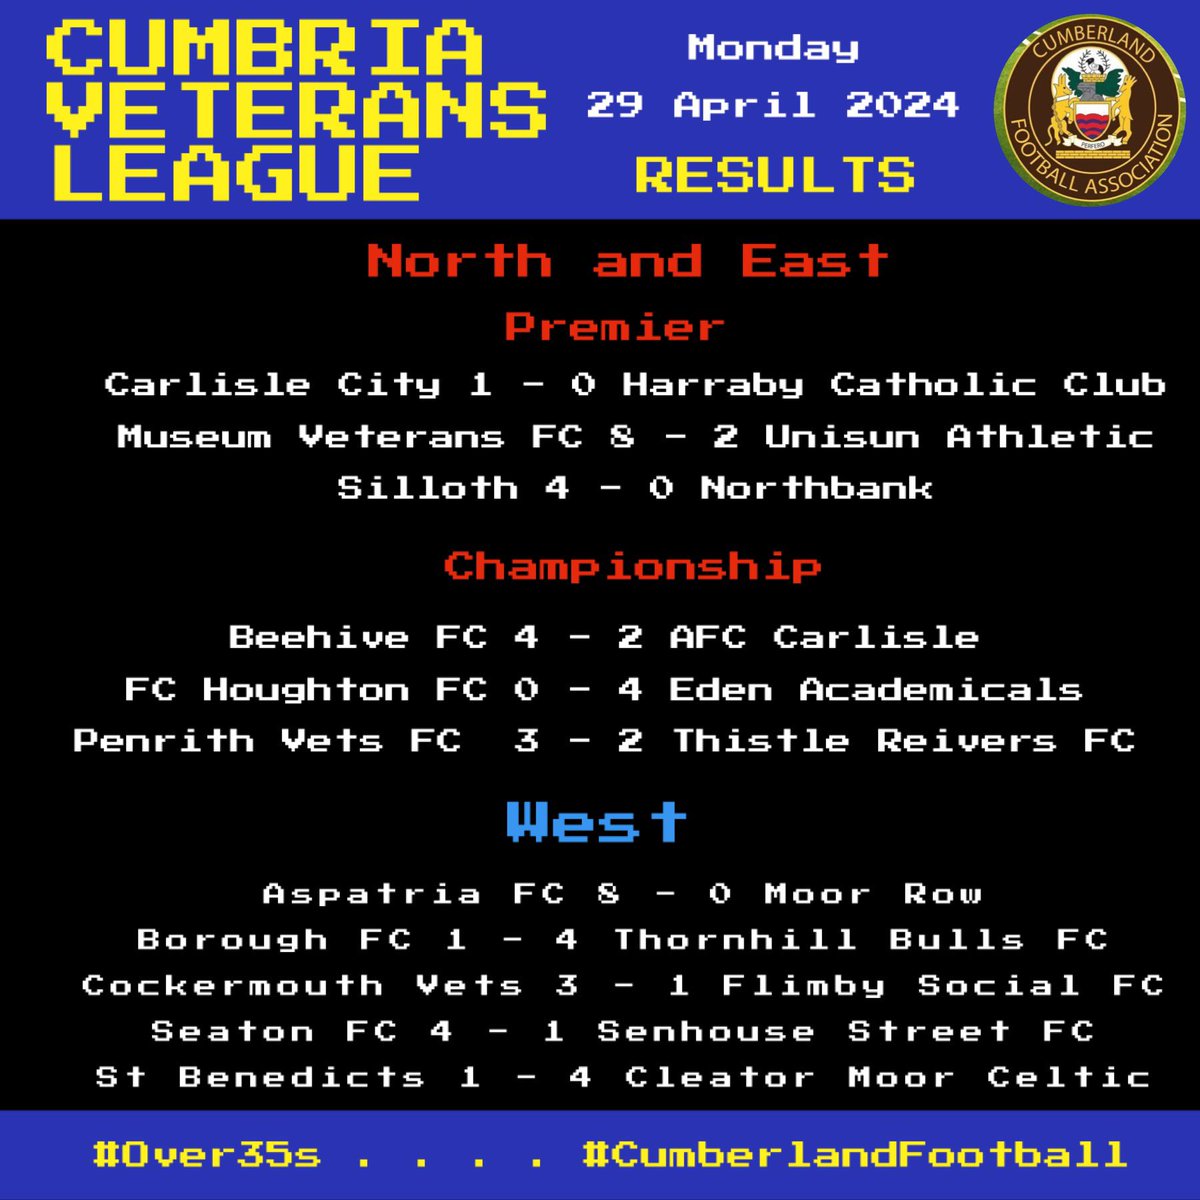 OVER 35 | Results from #MatchDay3 in the #CumbriaVeteransLeague

Early League leaders are:
🔝Carlisle City
🔝Beehive
🔝Cleator Moor Celtic

Fixtures & results for the #Over35s 
👉 bit.ly/CVeteransL 

#MondayNightFootball #CumberlandFootball